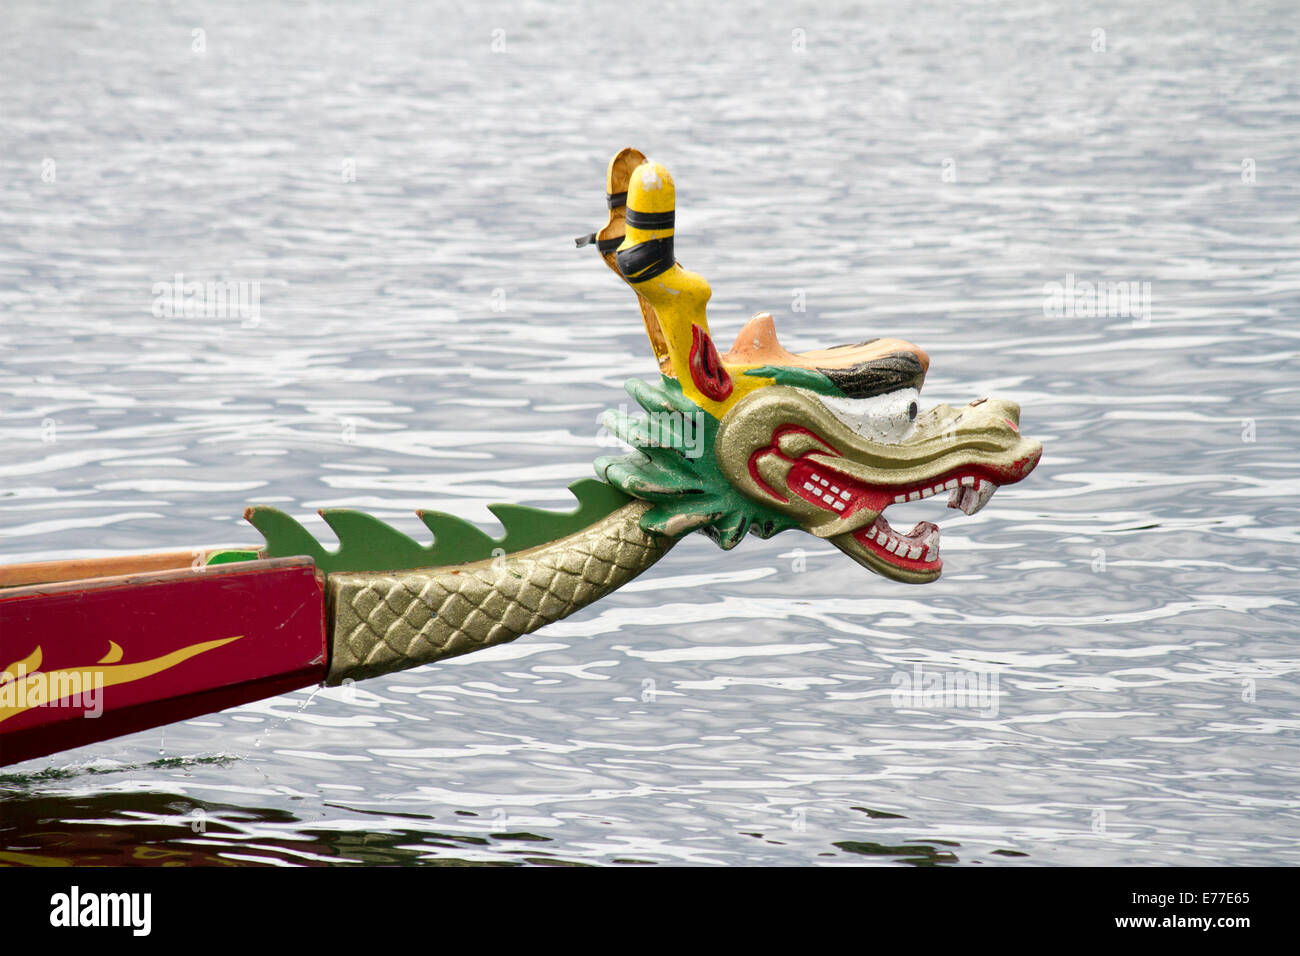 Dragon head at the bow of a dragon boat going through the water on Lake Ontario in Toronto, Canada Stock Photo